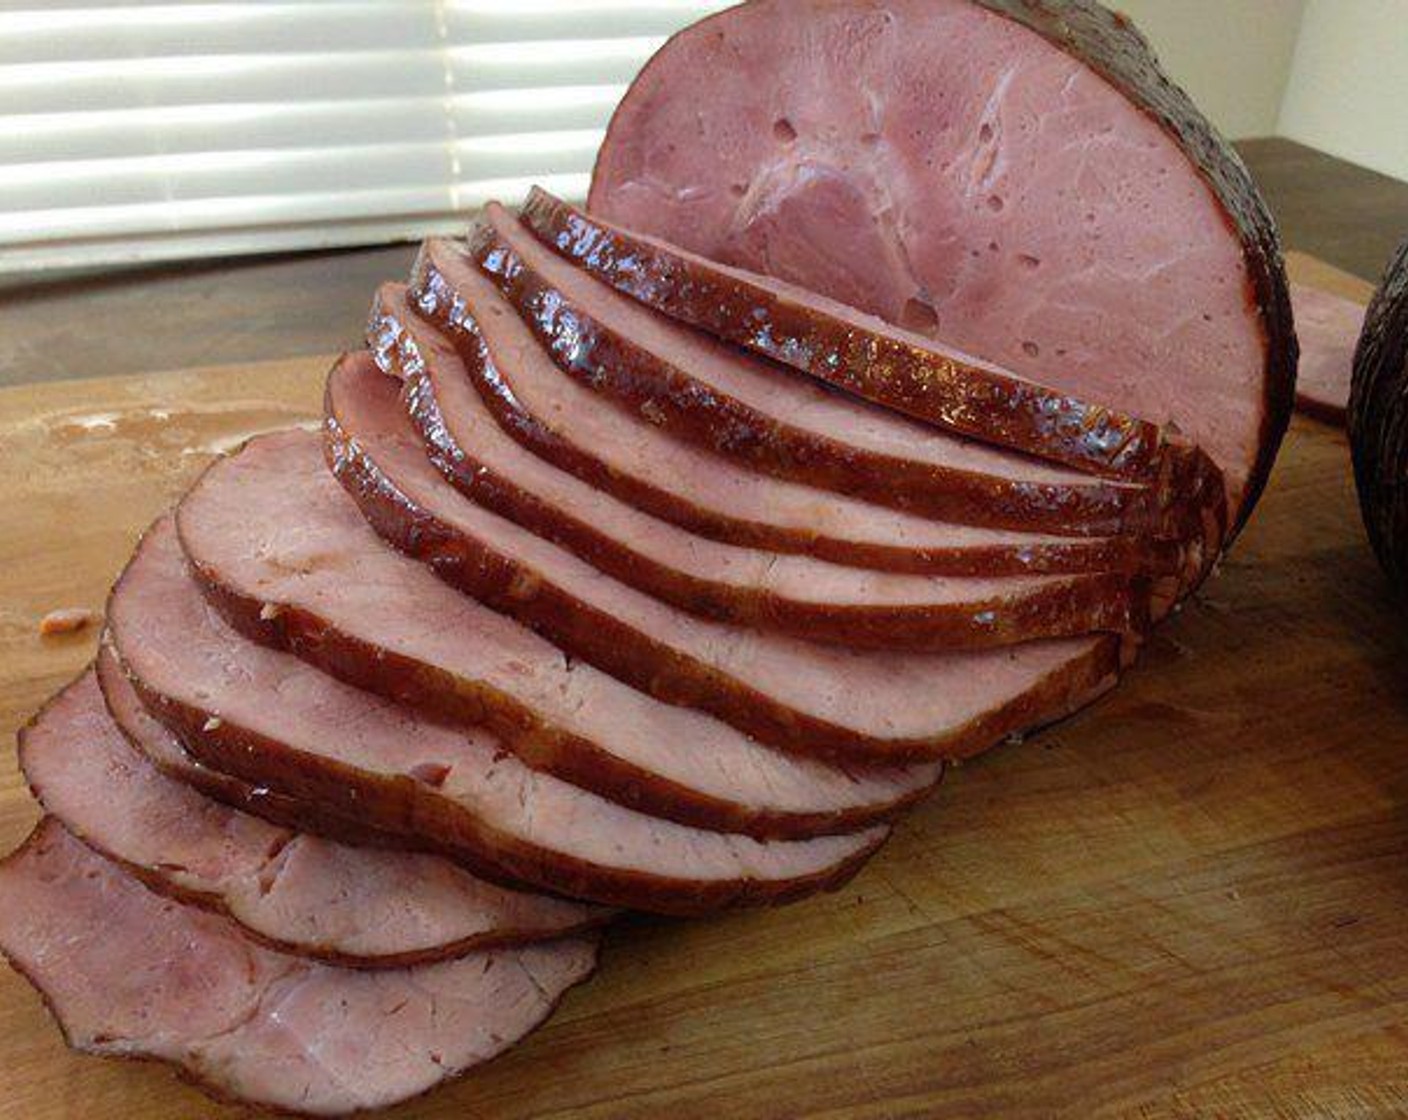 step 5 Once the Smoked Pit Ham gets close, go ahead and get it off the smoker. You don’t want to go over 140 degrees F (60 degrees C) because it can dry the ham out. Let the Pit Ham rest a few minutes before slicing for a juicier product.